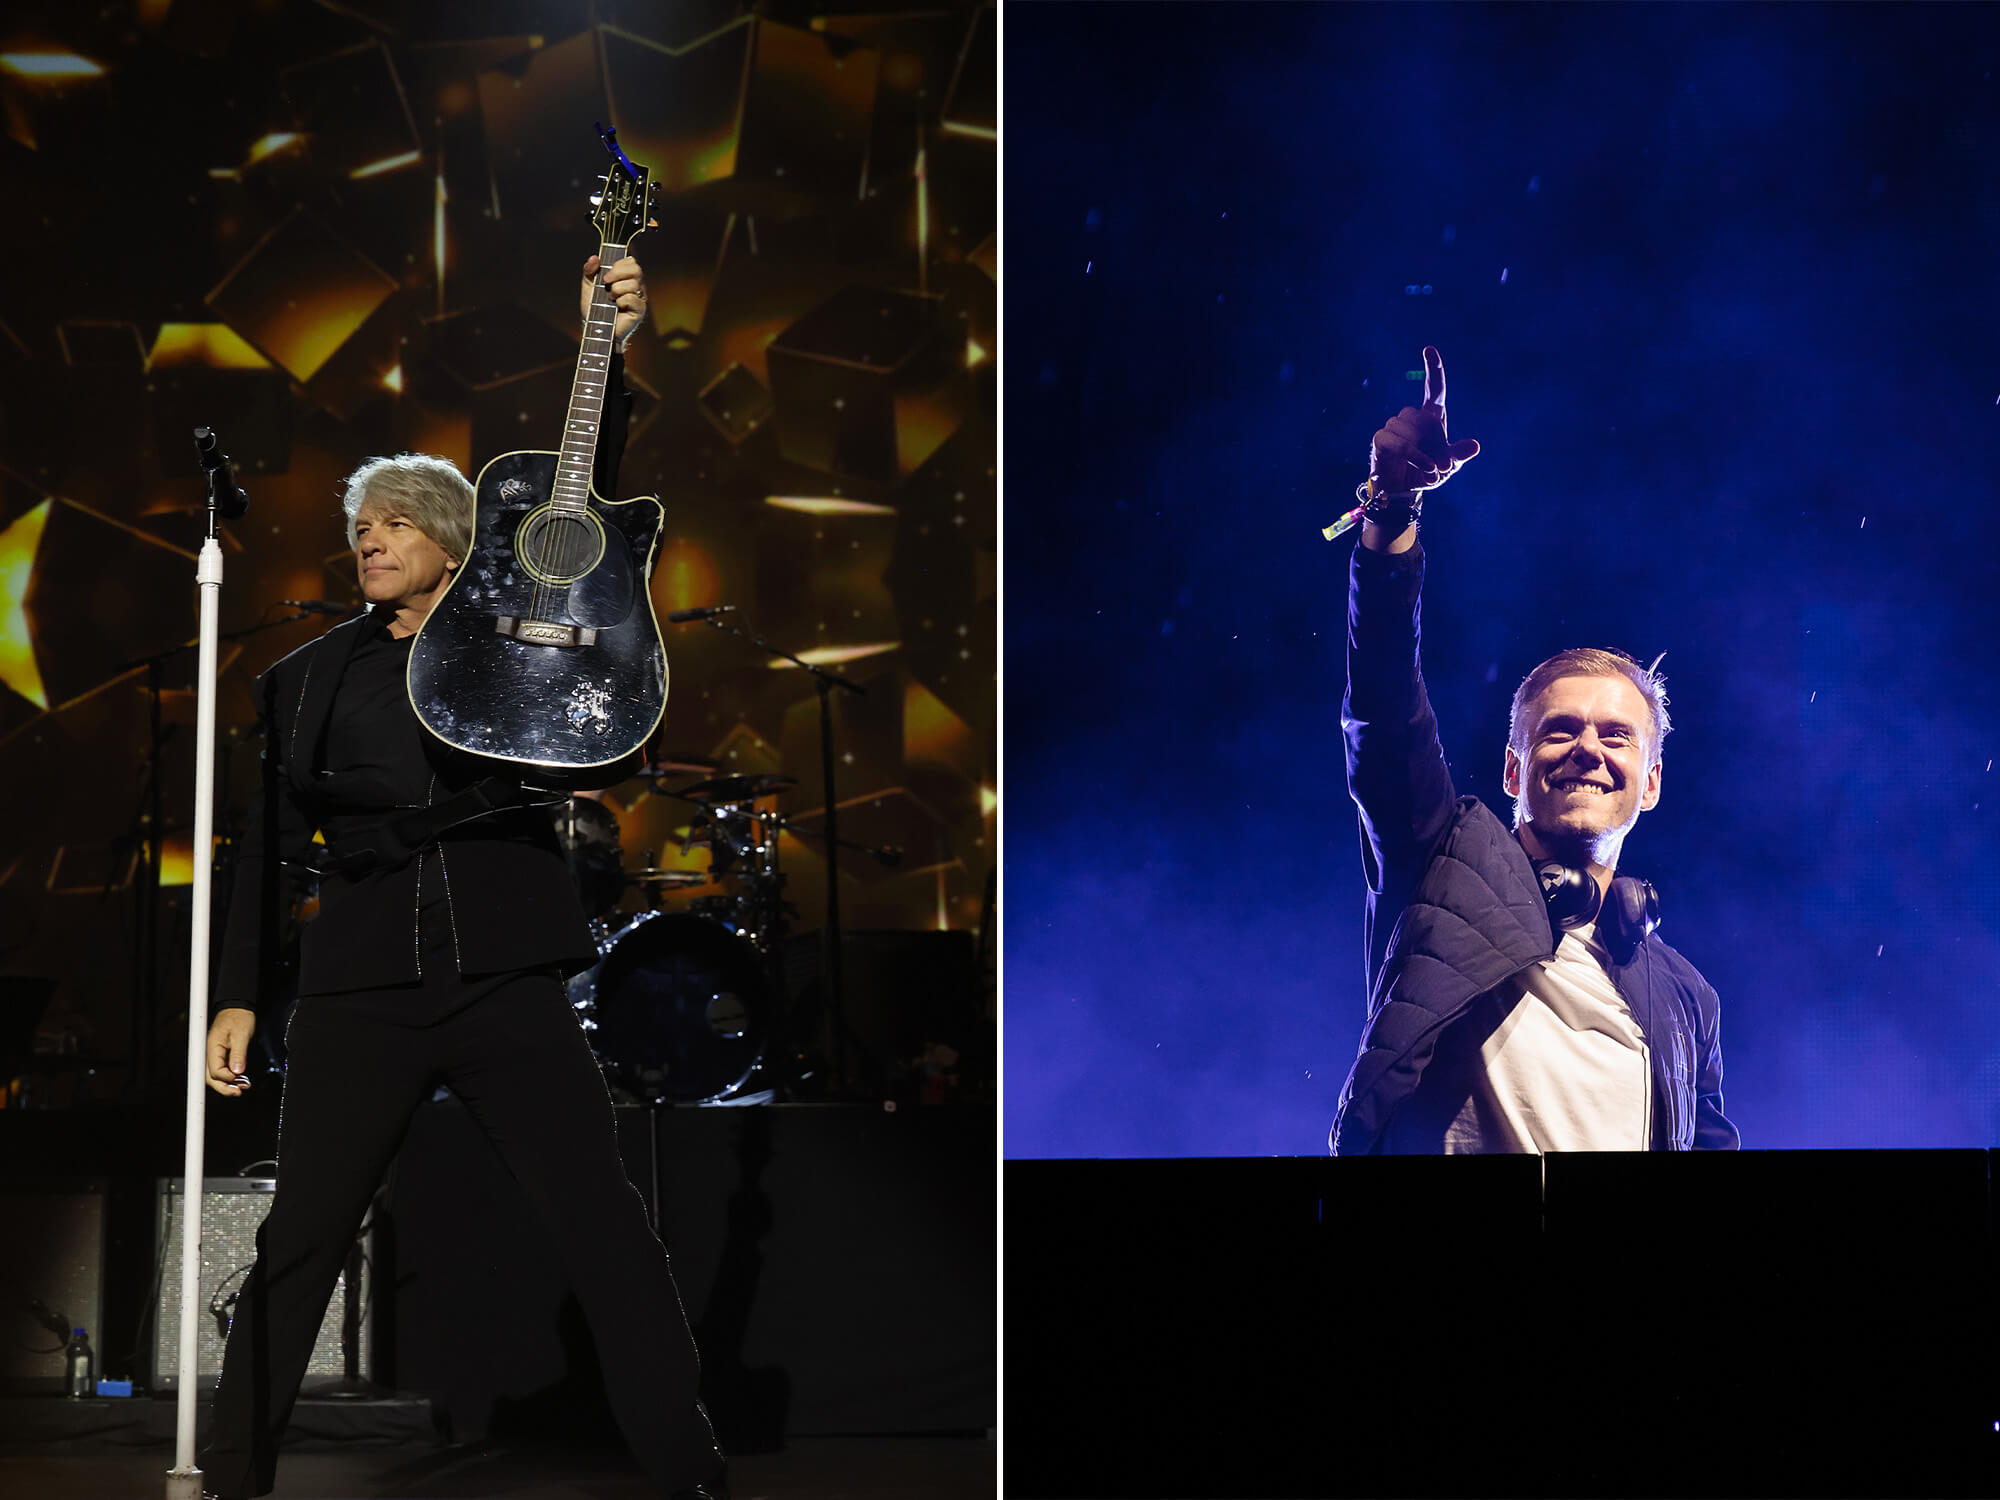 Jon Bon Jovi on stage (left) holding an acoustic guitar in the air. Admin Van Buuren on stage (right) behind the decks. He is smiling and has one arm pointing out into the crowd.